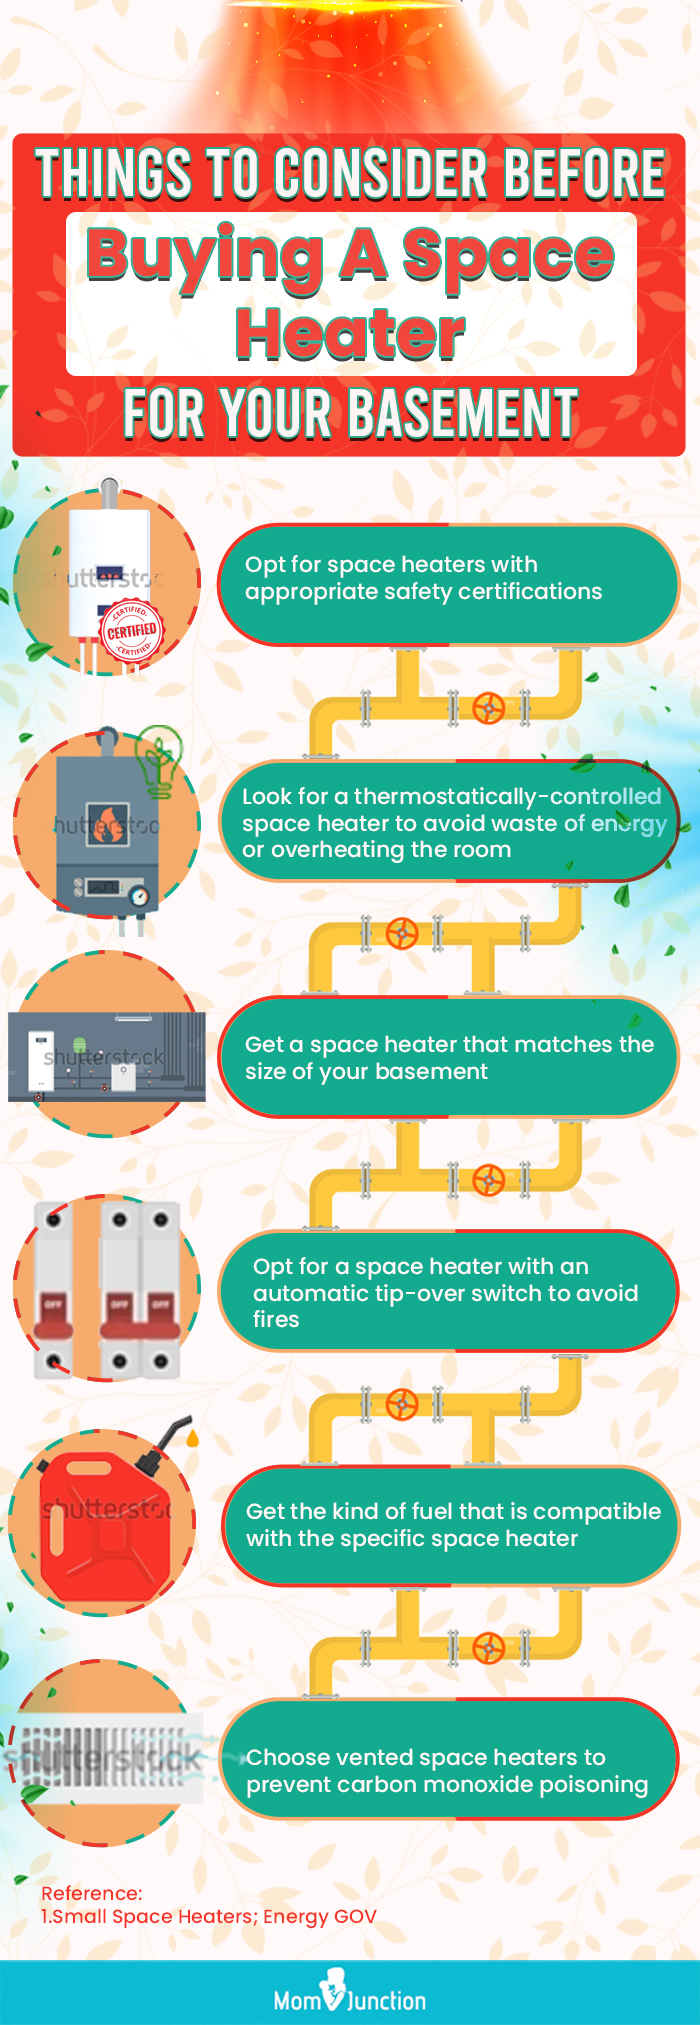 Things To Consider Before Buying A Space Heater For Your Basement